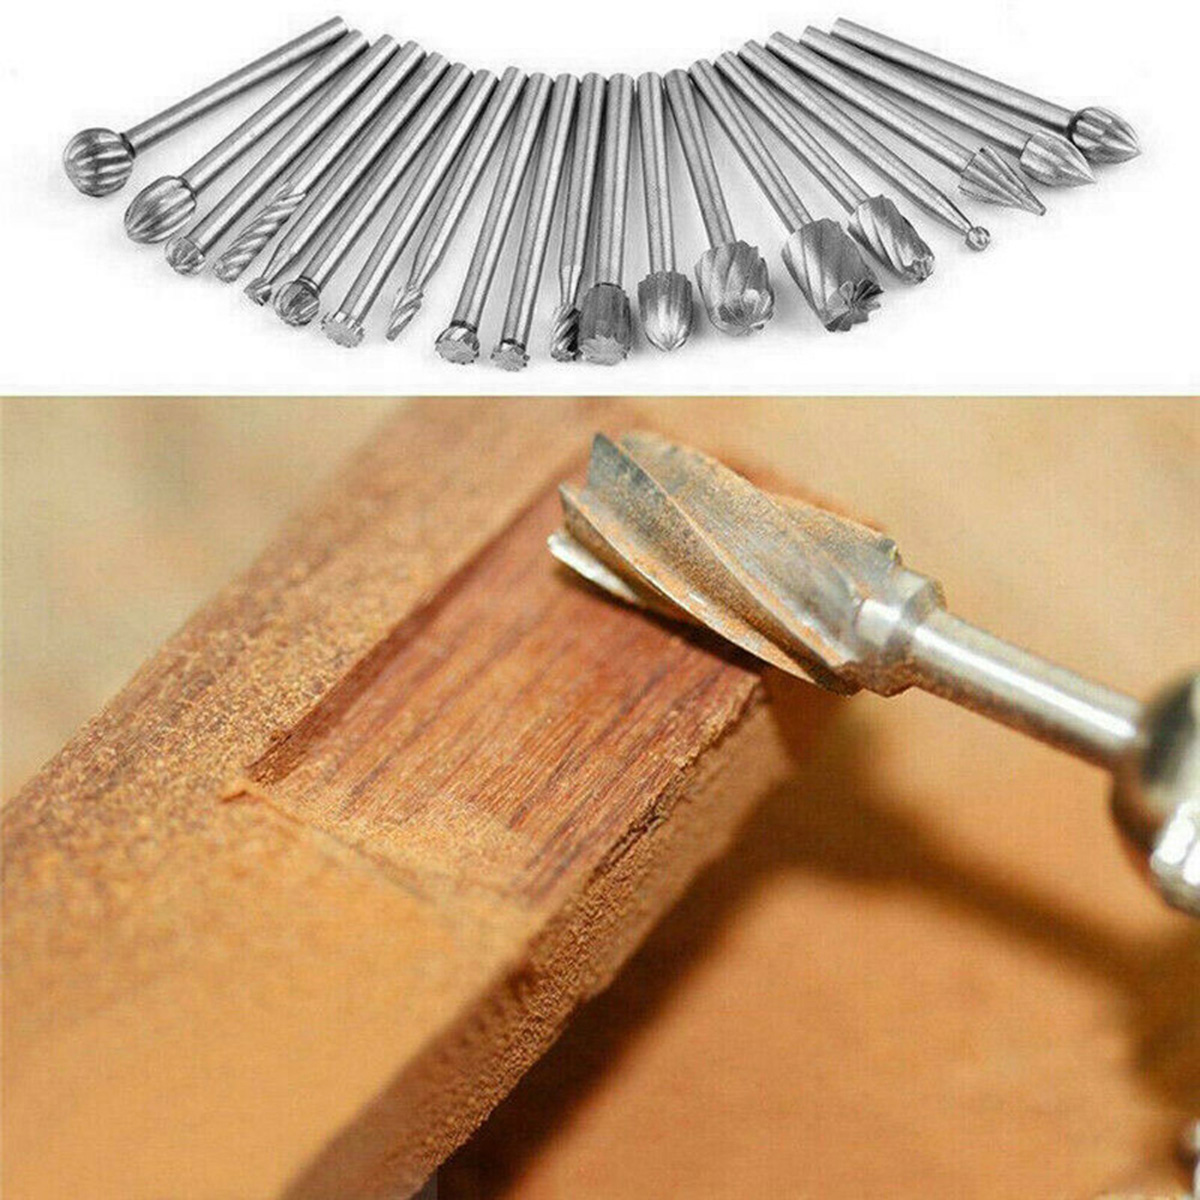 Promotion! 20 Pcs Carbide Double Cut For Dremel Carving Bits With 1/8 Inch  Shank And 1/4 Inch Head Length Tungsten Carbide Rotar - AliExpress